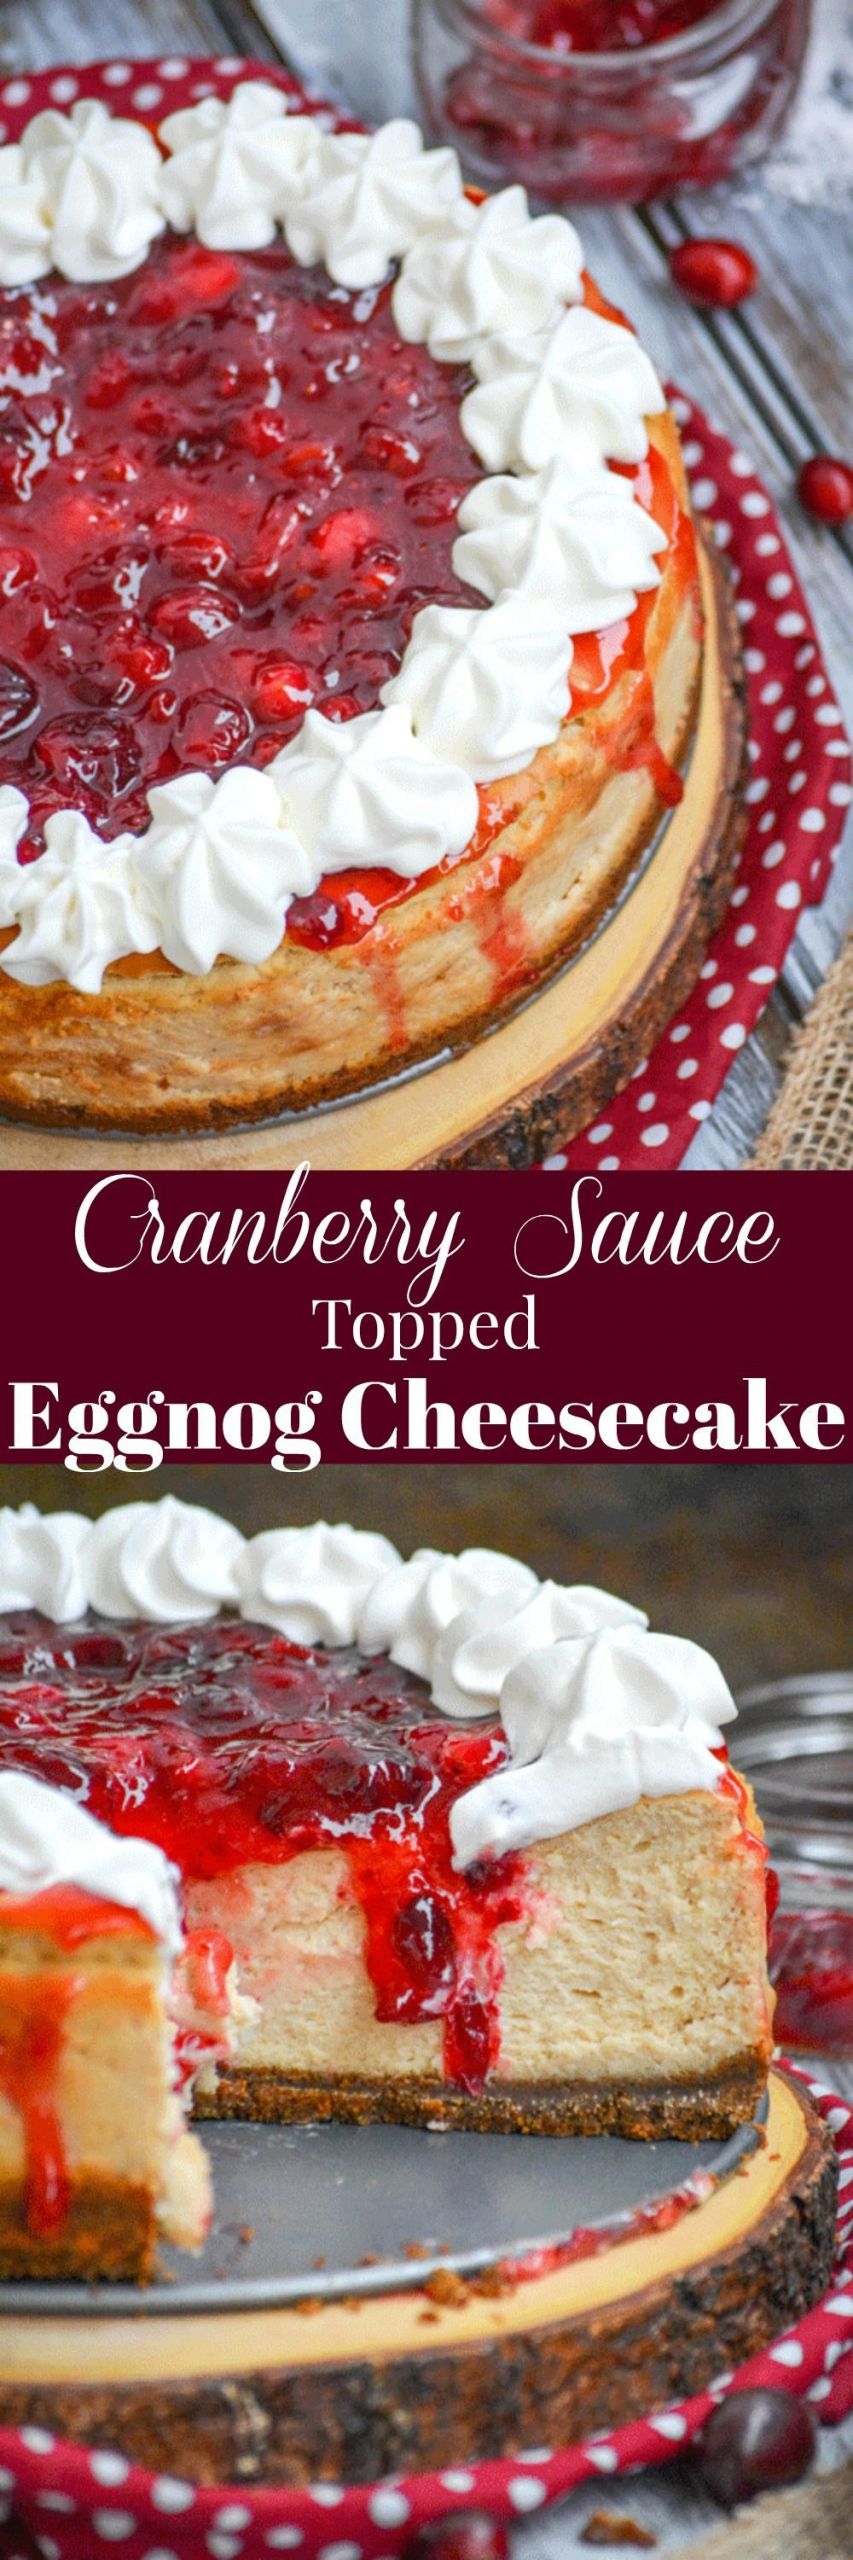 Food Maxx Thanksgiving Hours
 Cranberry Sauce Topped Eggnog Cheesecake Recipe